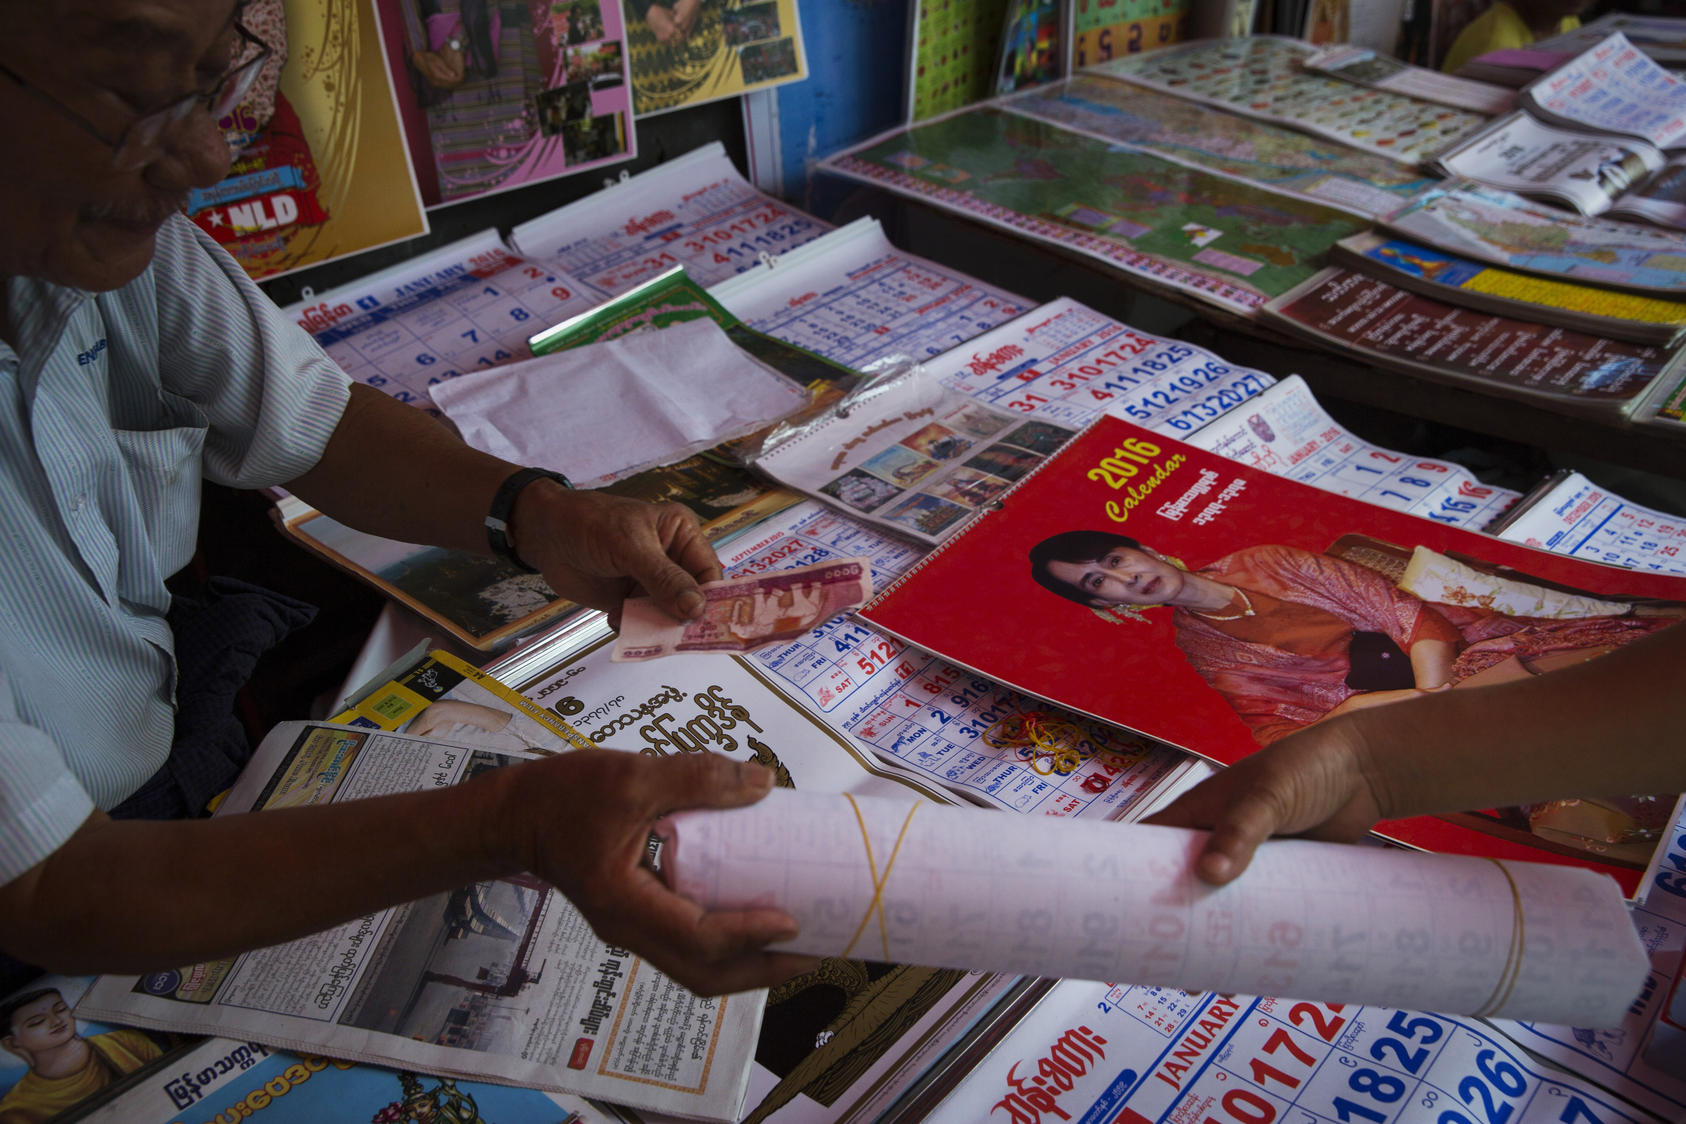 A woman purchases a calendar of Aung San Suu Kyi – who says she plans to circumvent the ban on her becoming president that the generals wrote into the Constitution – in Yangon, Myanmar, Nov. 10, 2015. Vestiges of Myanmar’s police state, alive and well, will wield enormous influence even with the lopsided election triumph by Aung San Suu Kyi’s Party.